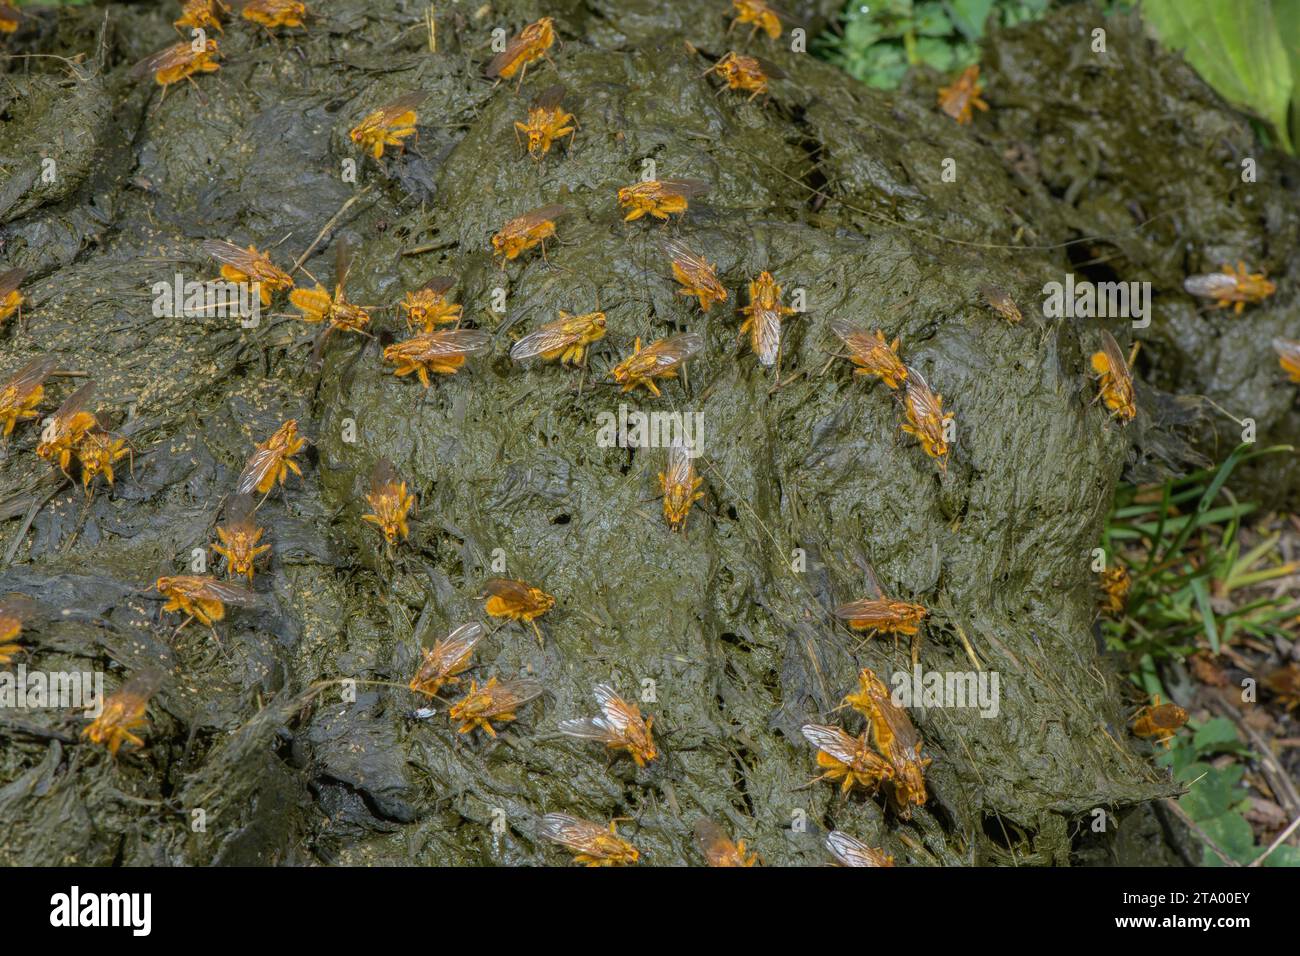 Yellow dung flies, Scathophaga stercoraria, in large numbers on organically-farmed cattle dung. Stock Photo